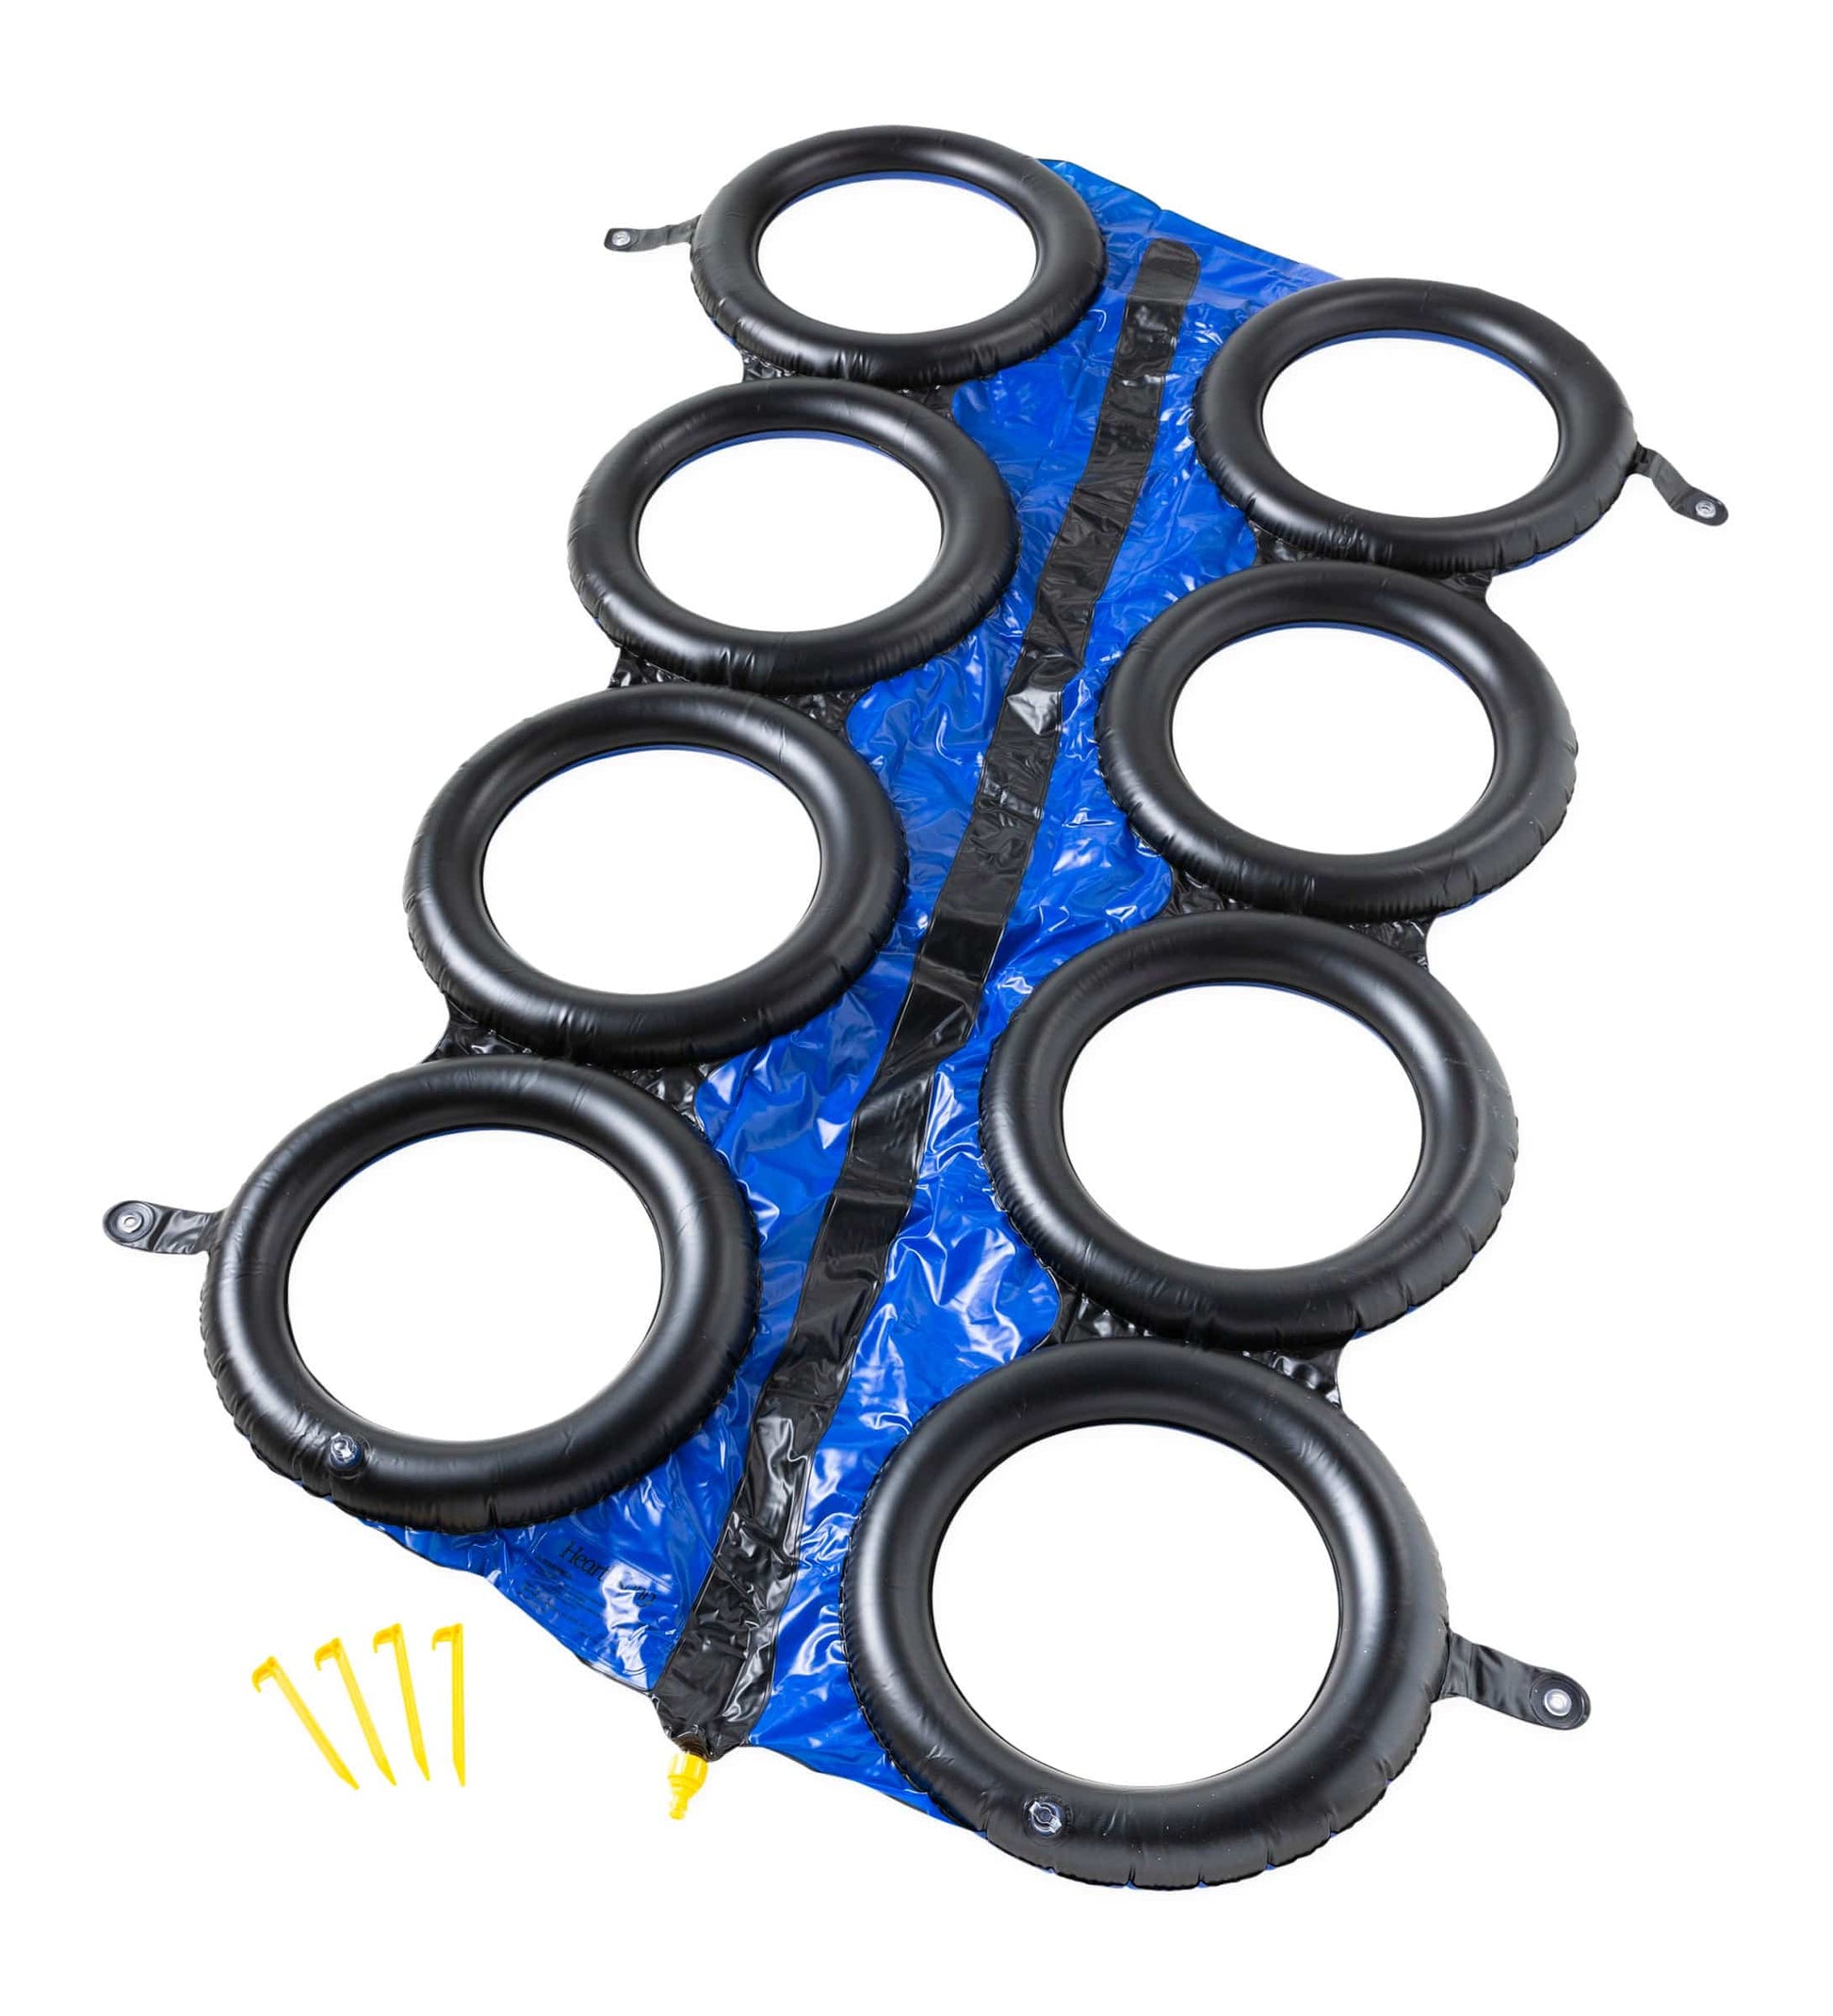 58-Inch Inflatable Tire Run with Sprinkler